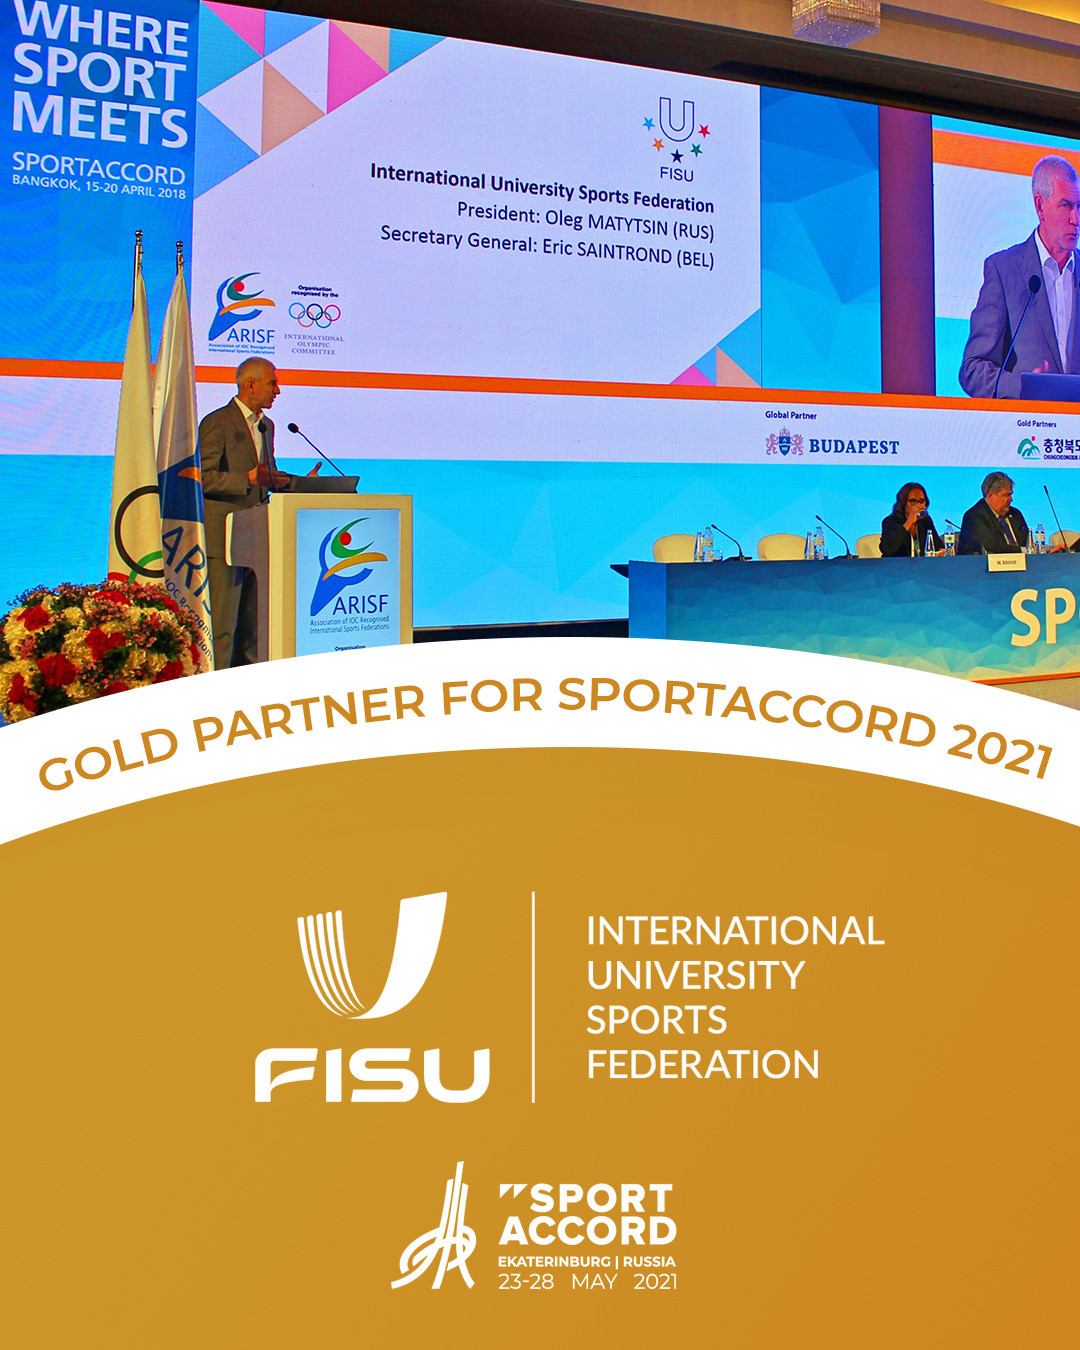 FISU has signed up as a gold partner of next year's event ©SportAccord